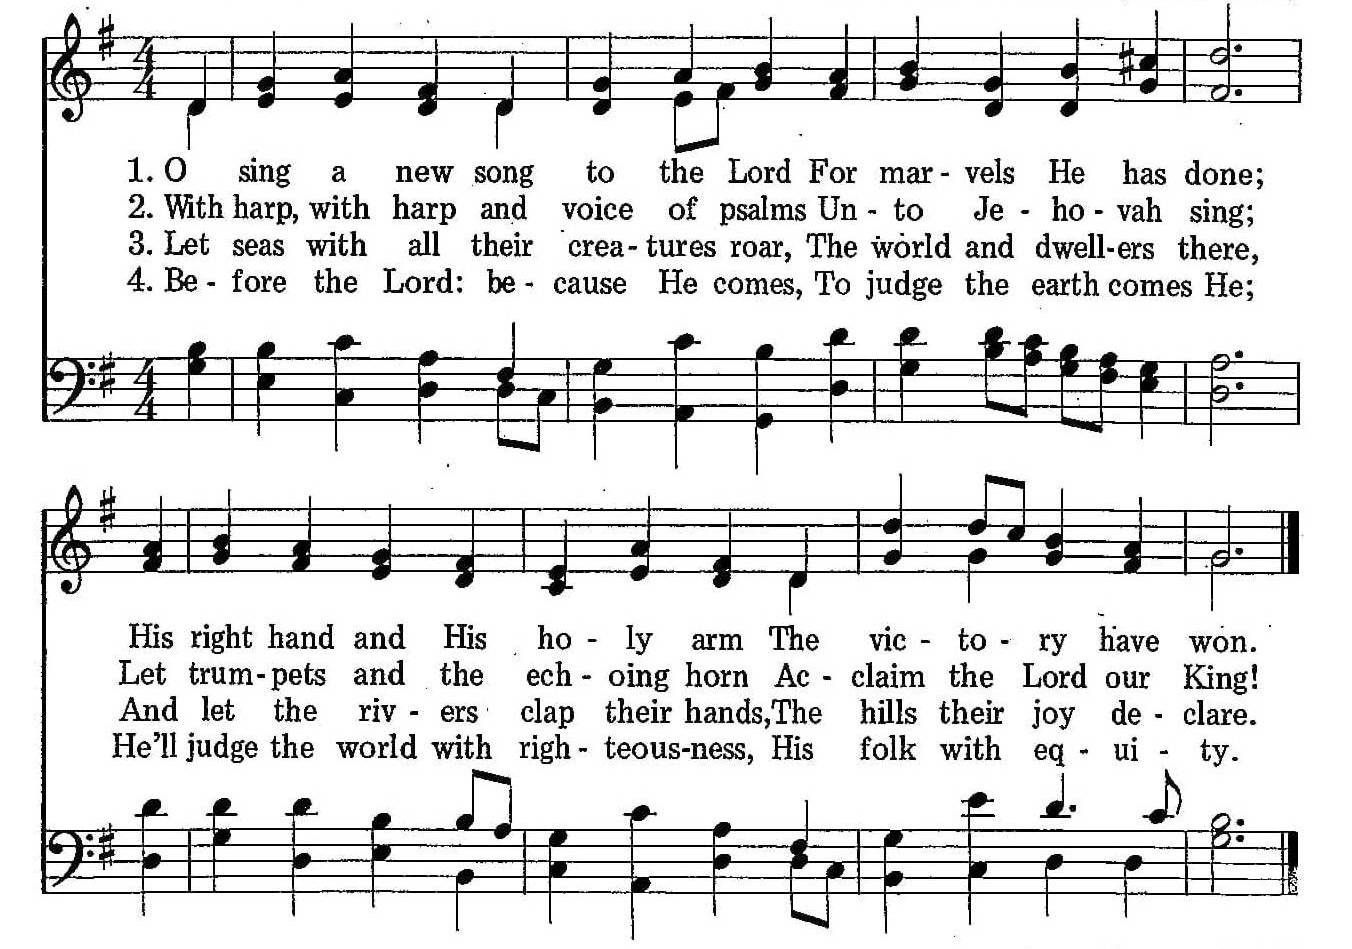 019 – O Sing a New Song to the Lord sheet music